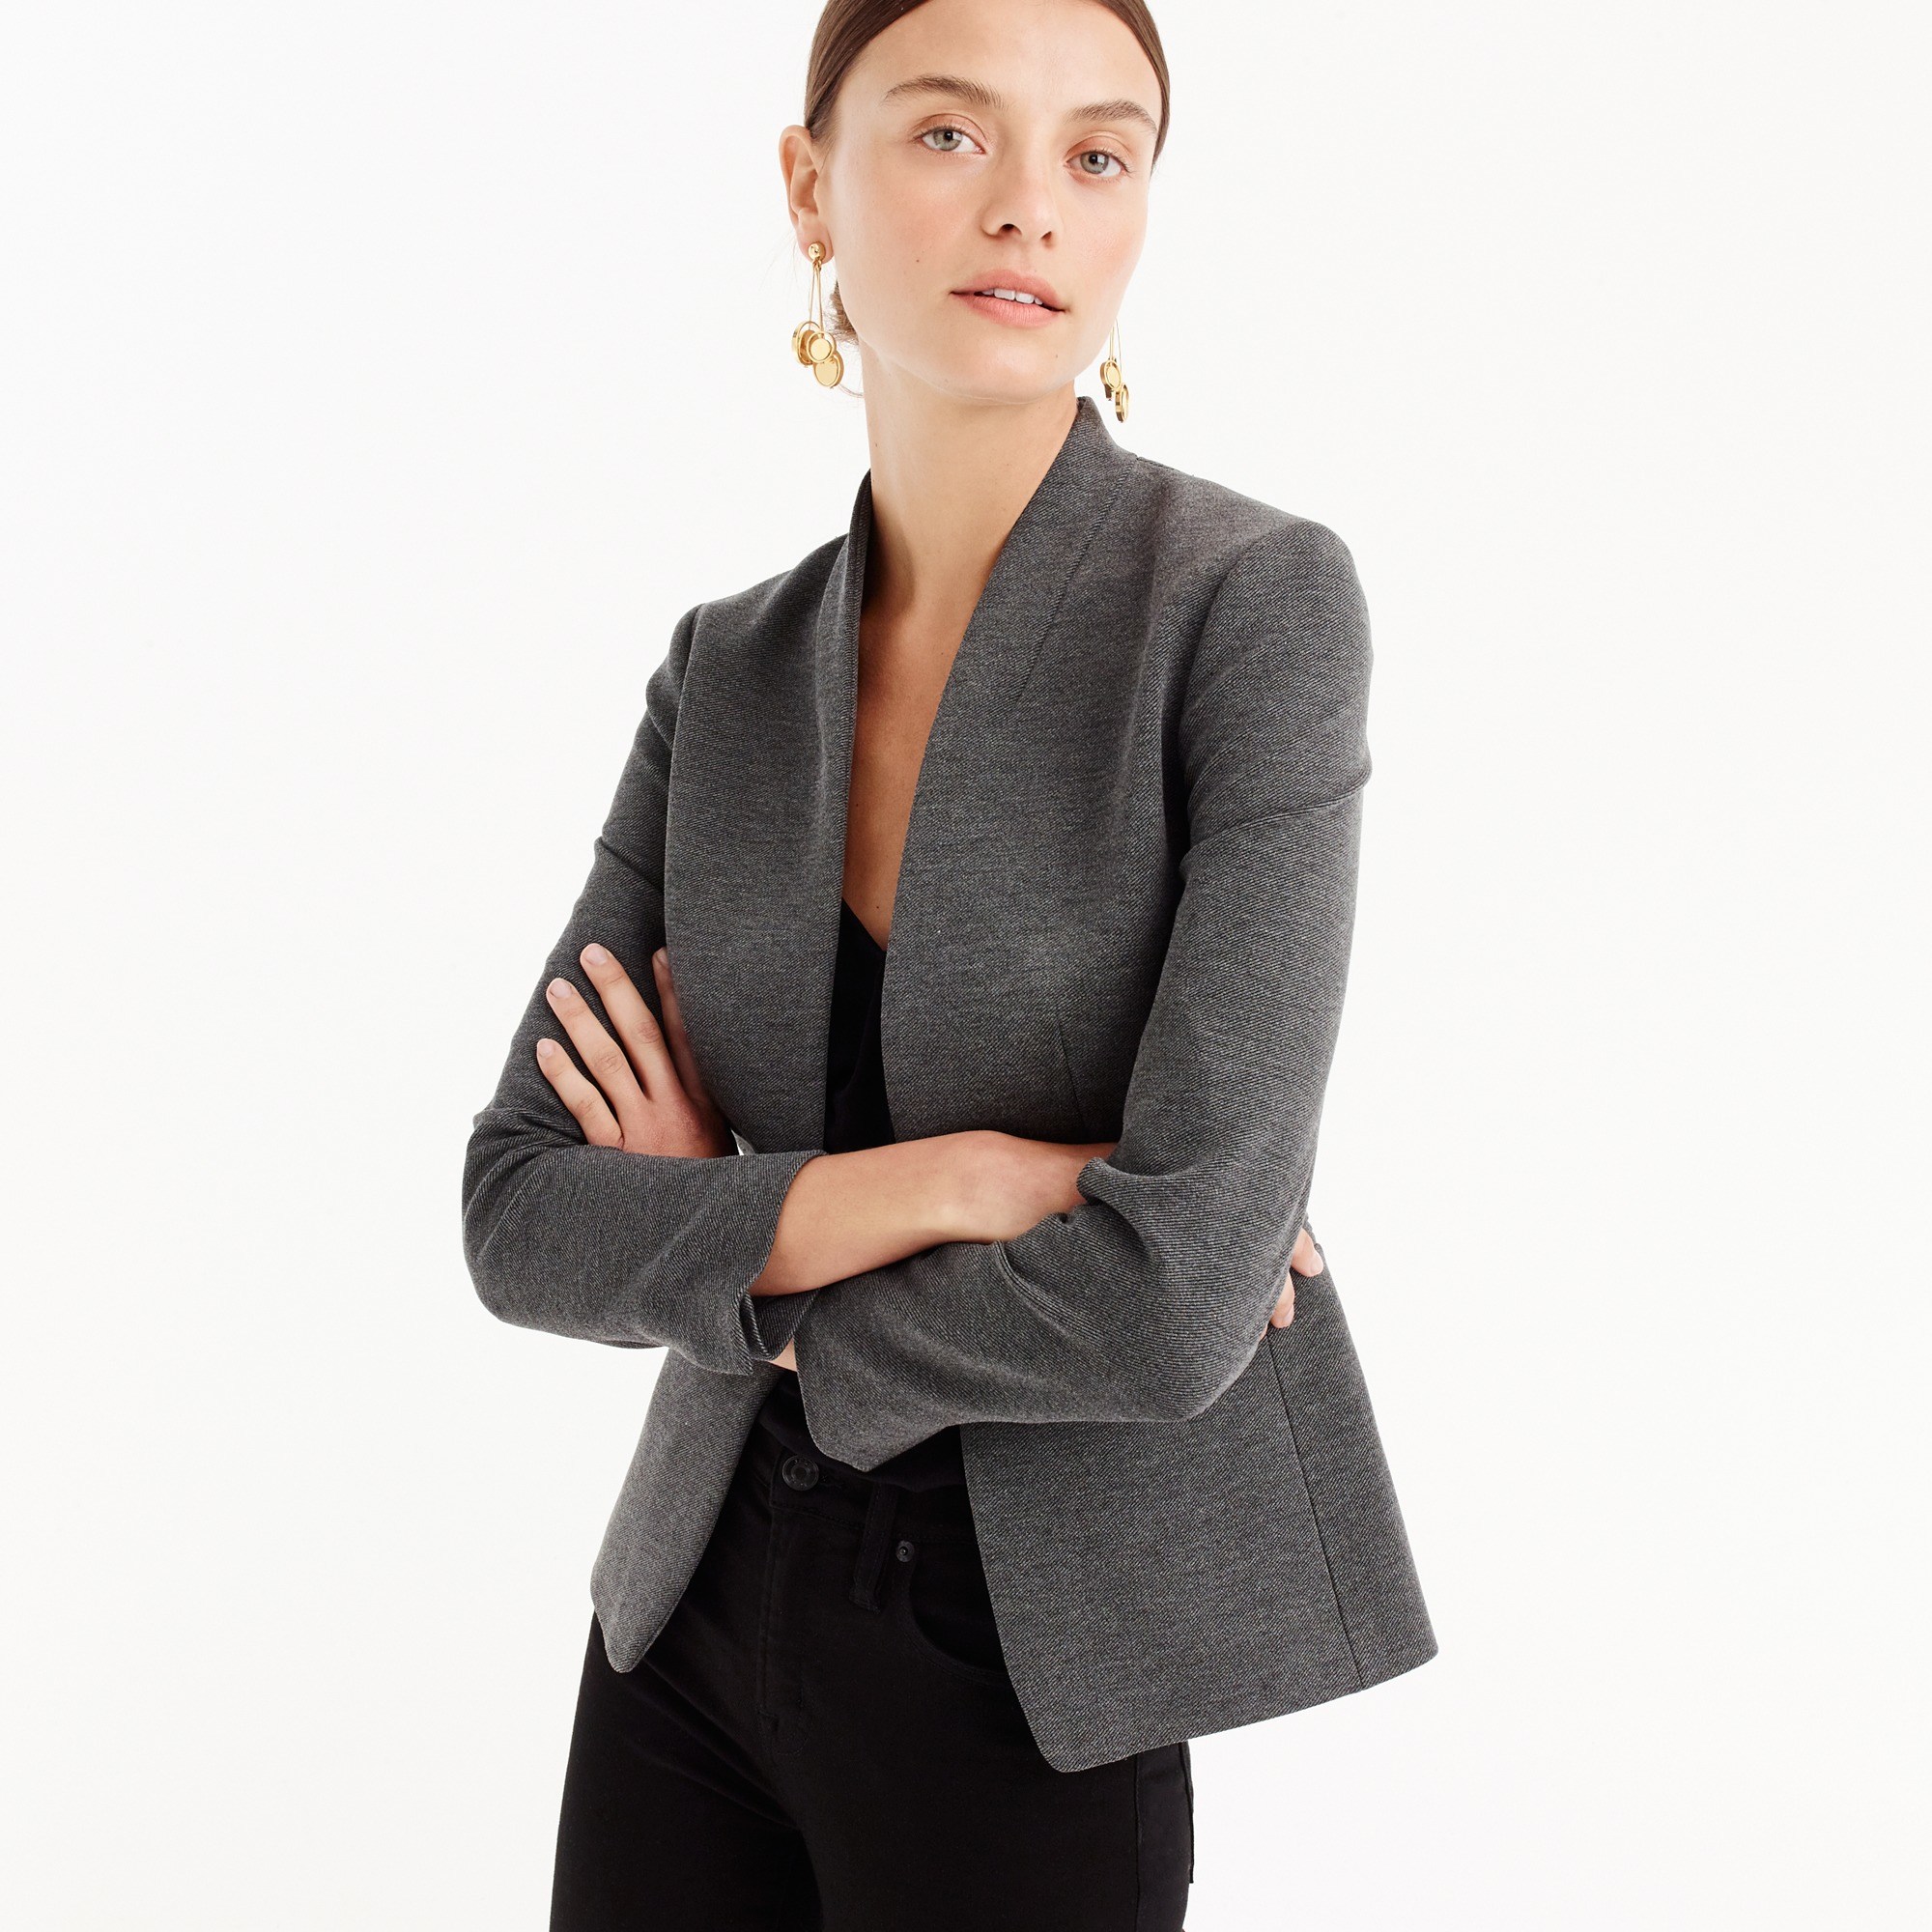 Women’s Blazer chic in business and leisure